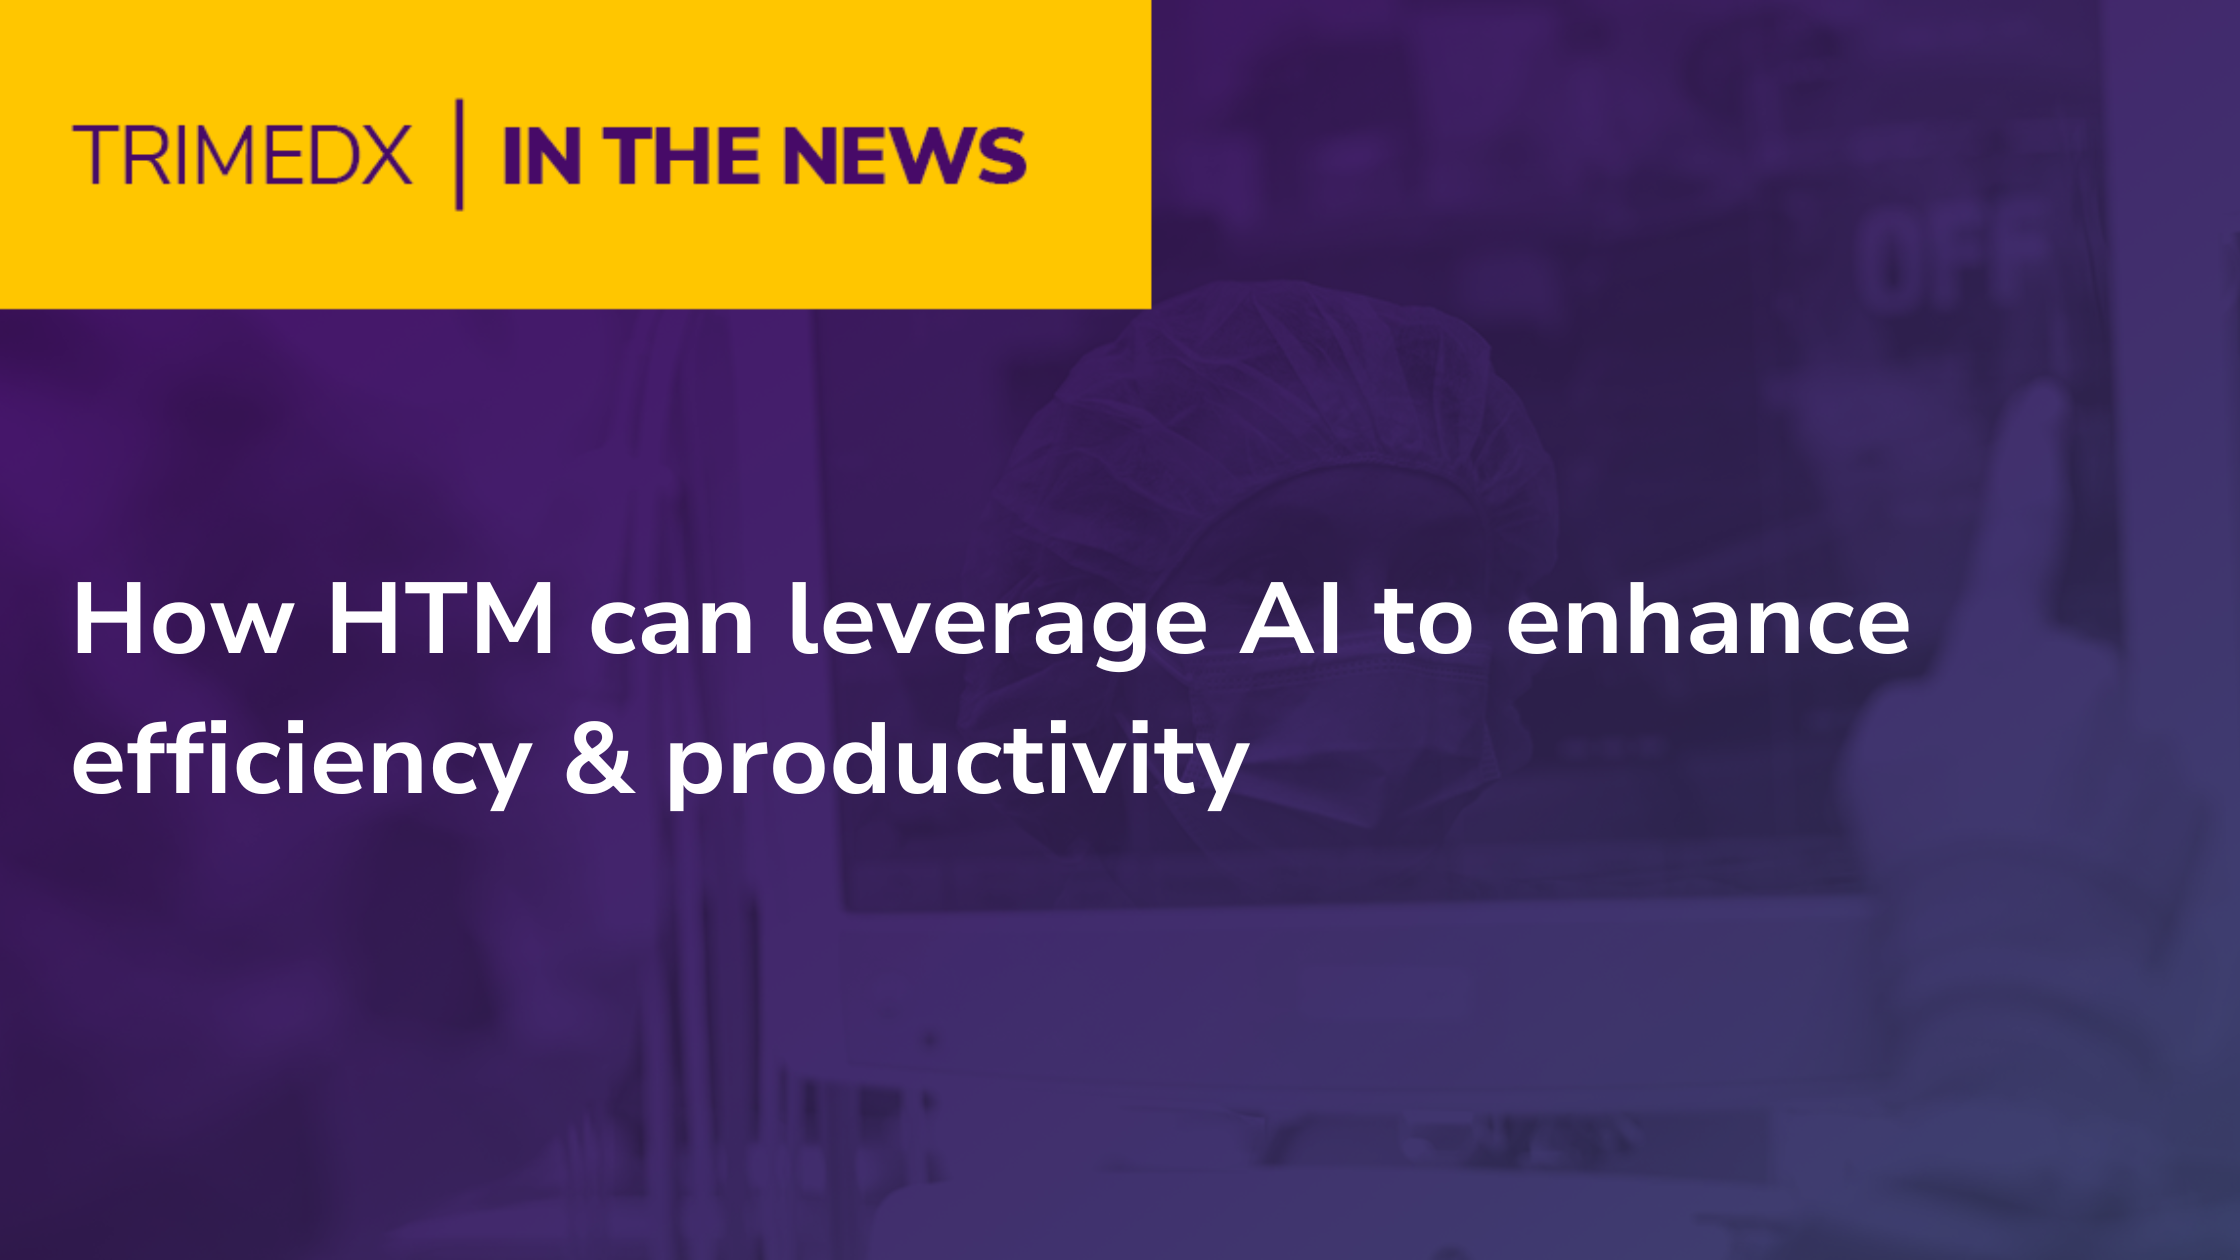 How HTM can leverage AI to enhance efficiency & productivity TRIMEDX In the News graphic